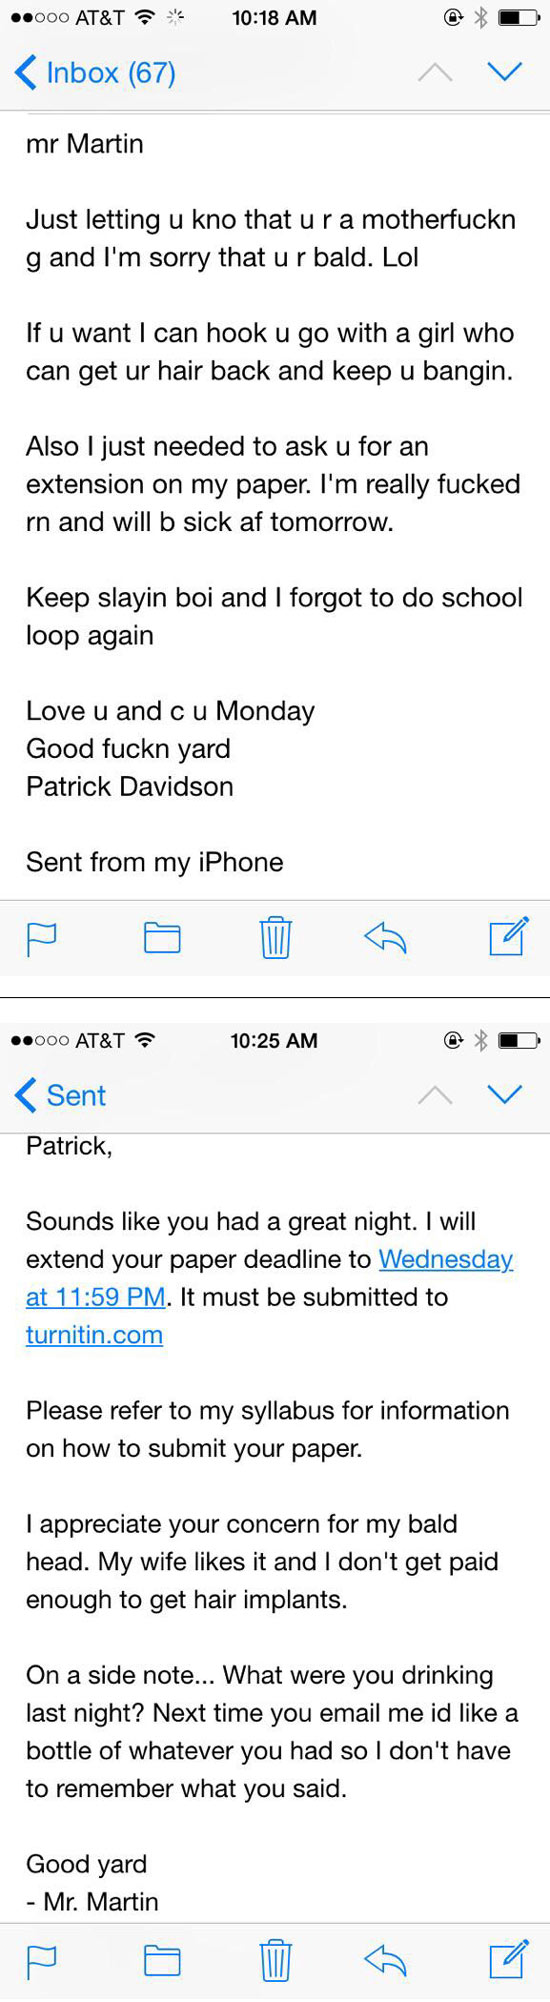 A student emails his professor while drunk. results are amazing.